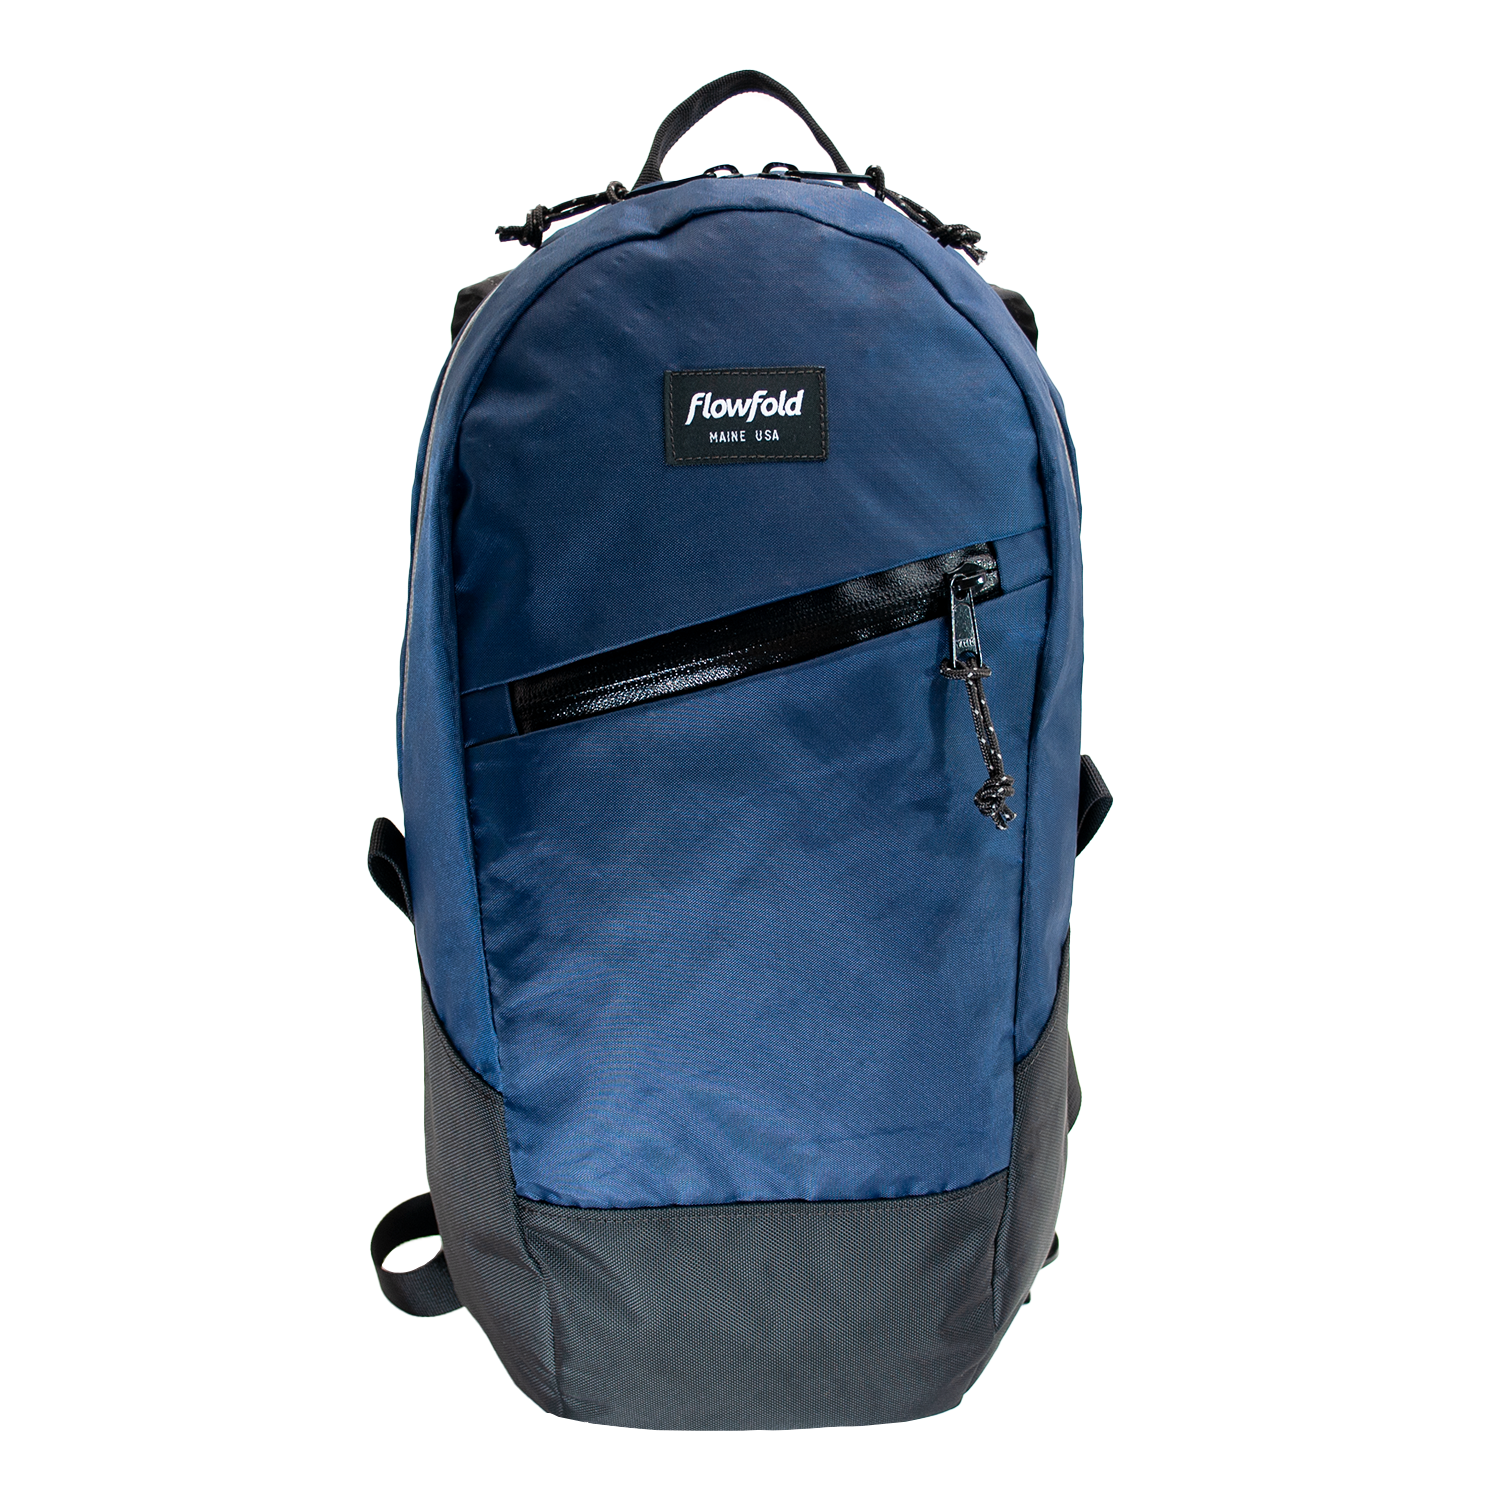 Flowfold Recycled Navy Optimist 10L Mini Day Backpack with Front Zipper Pocket Made in USA, Maine by Flowfold